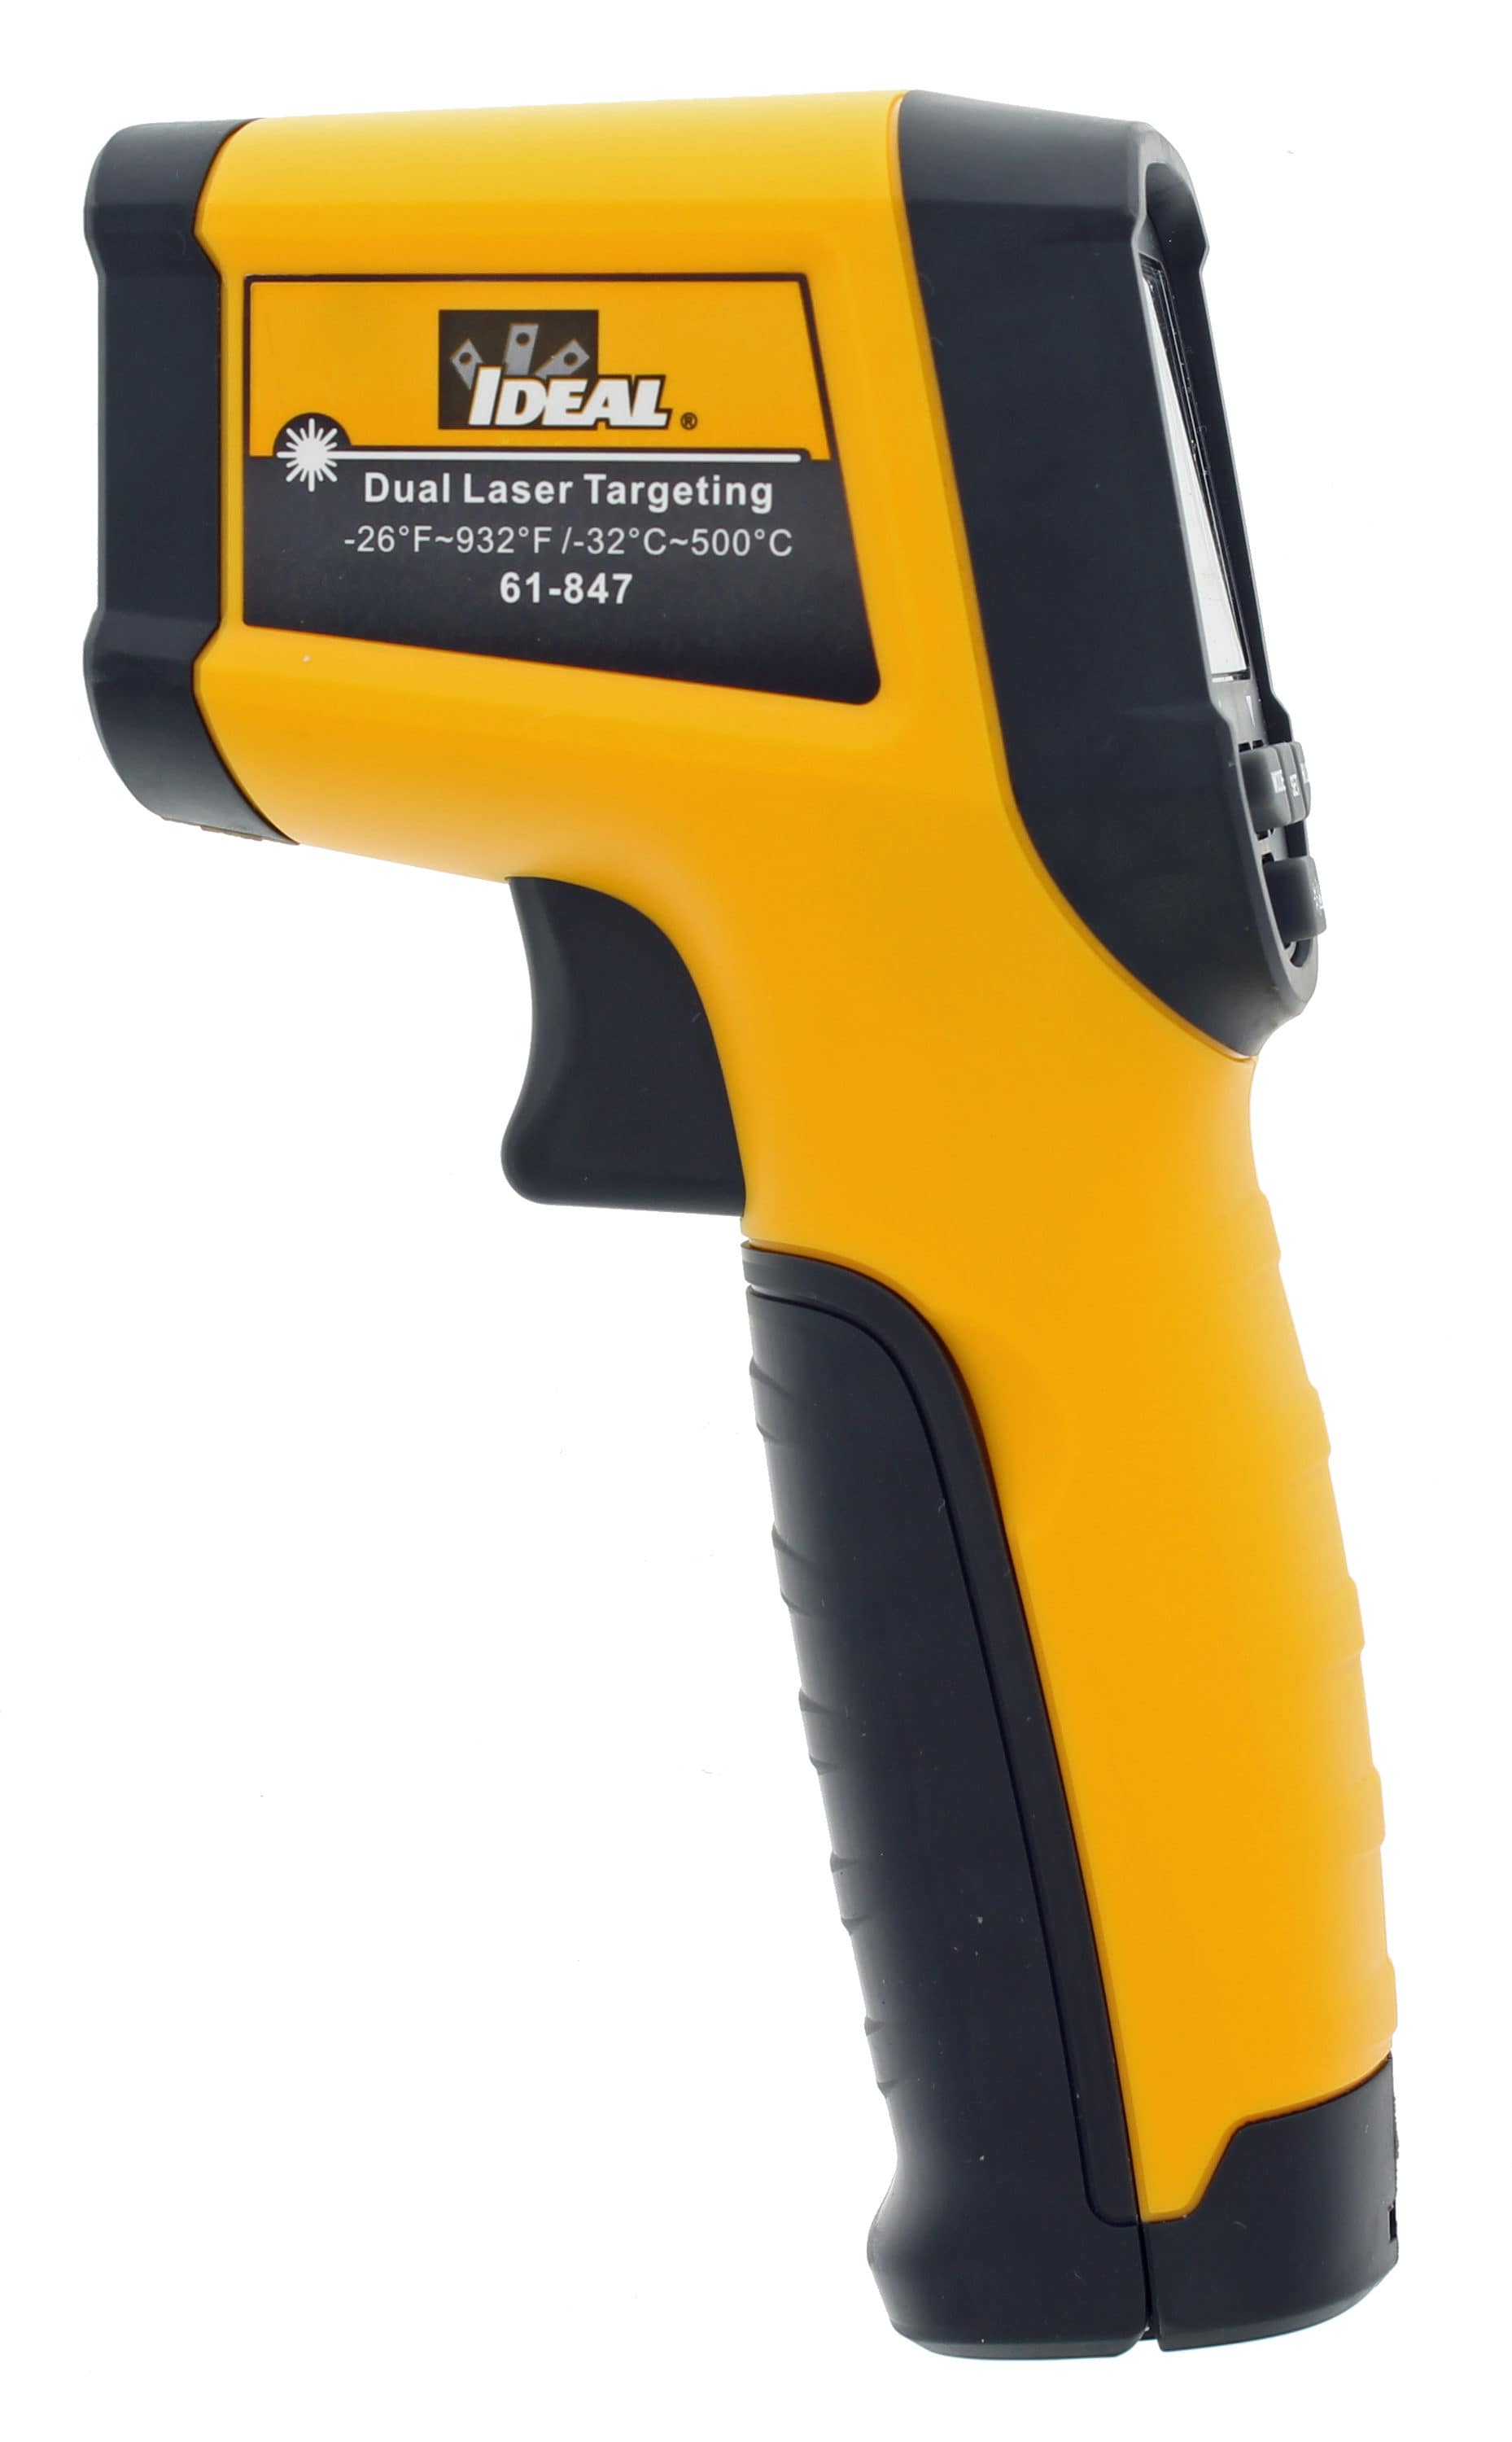 General Tools Mini Non-Contact Laser Infrared Thermometer